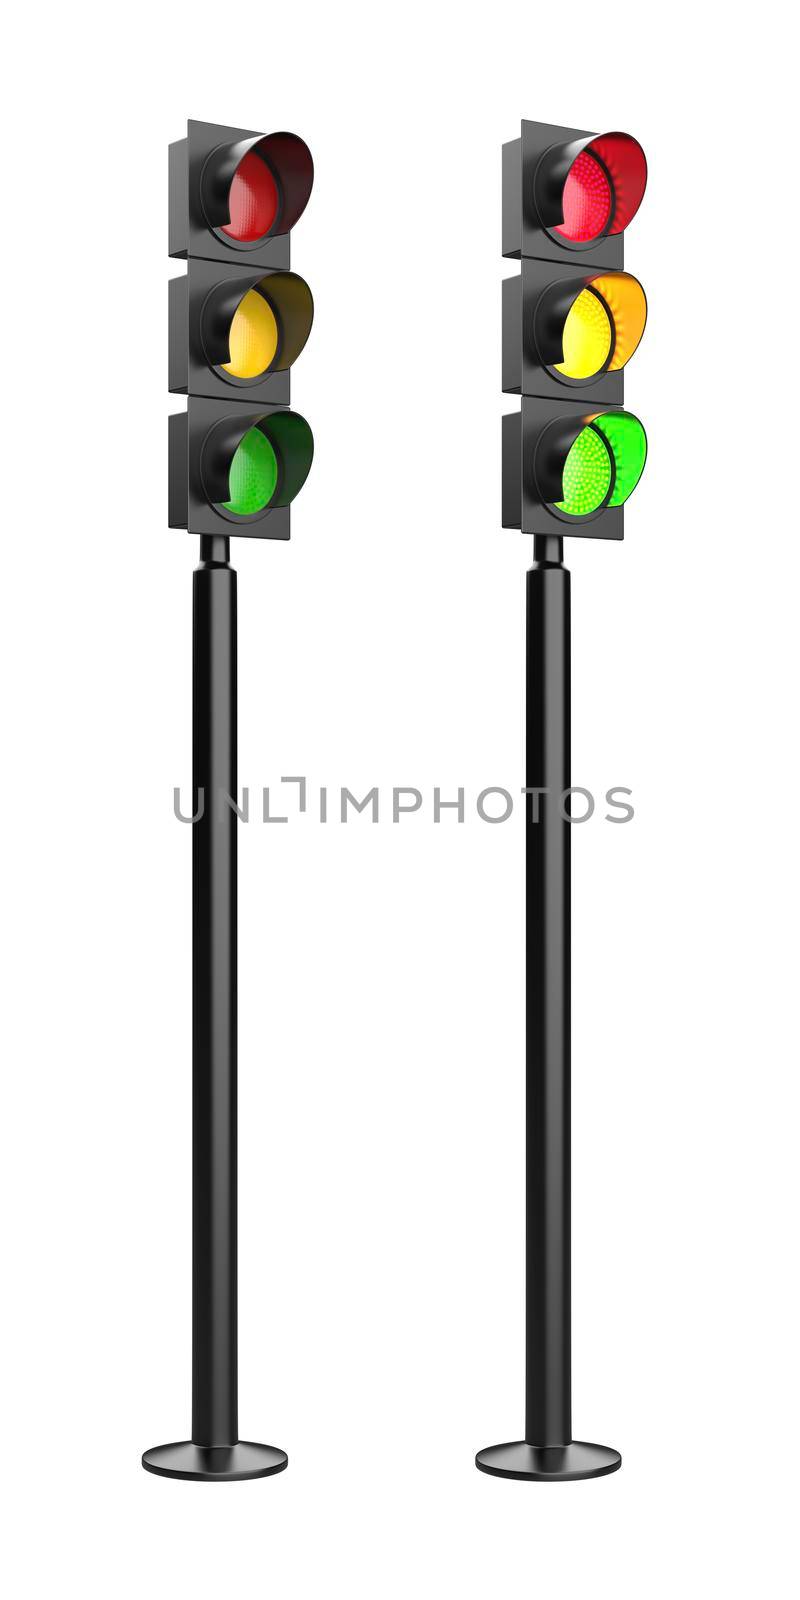 Set of traffic lights by magraphics